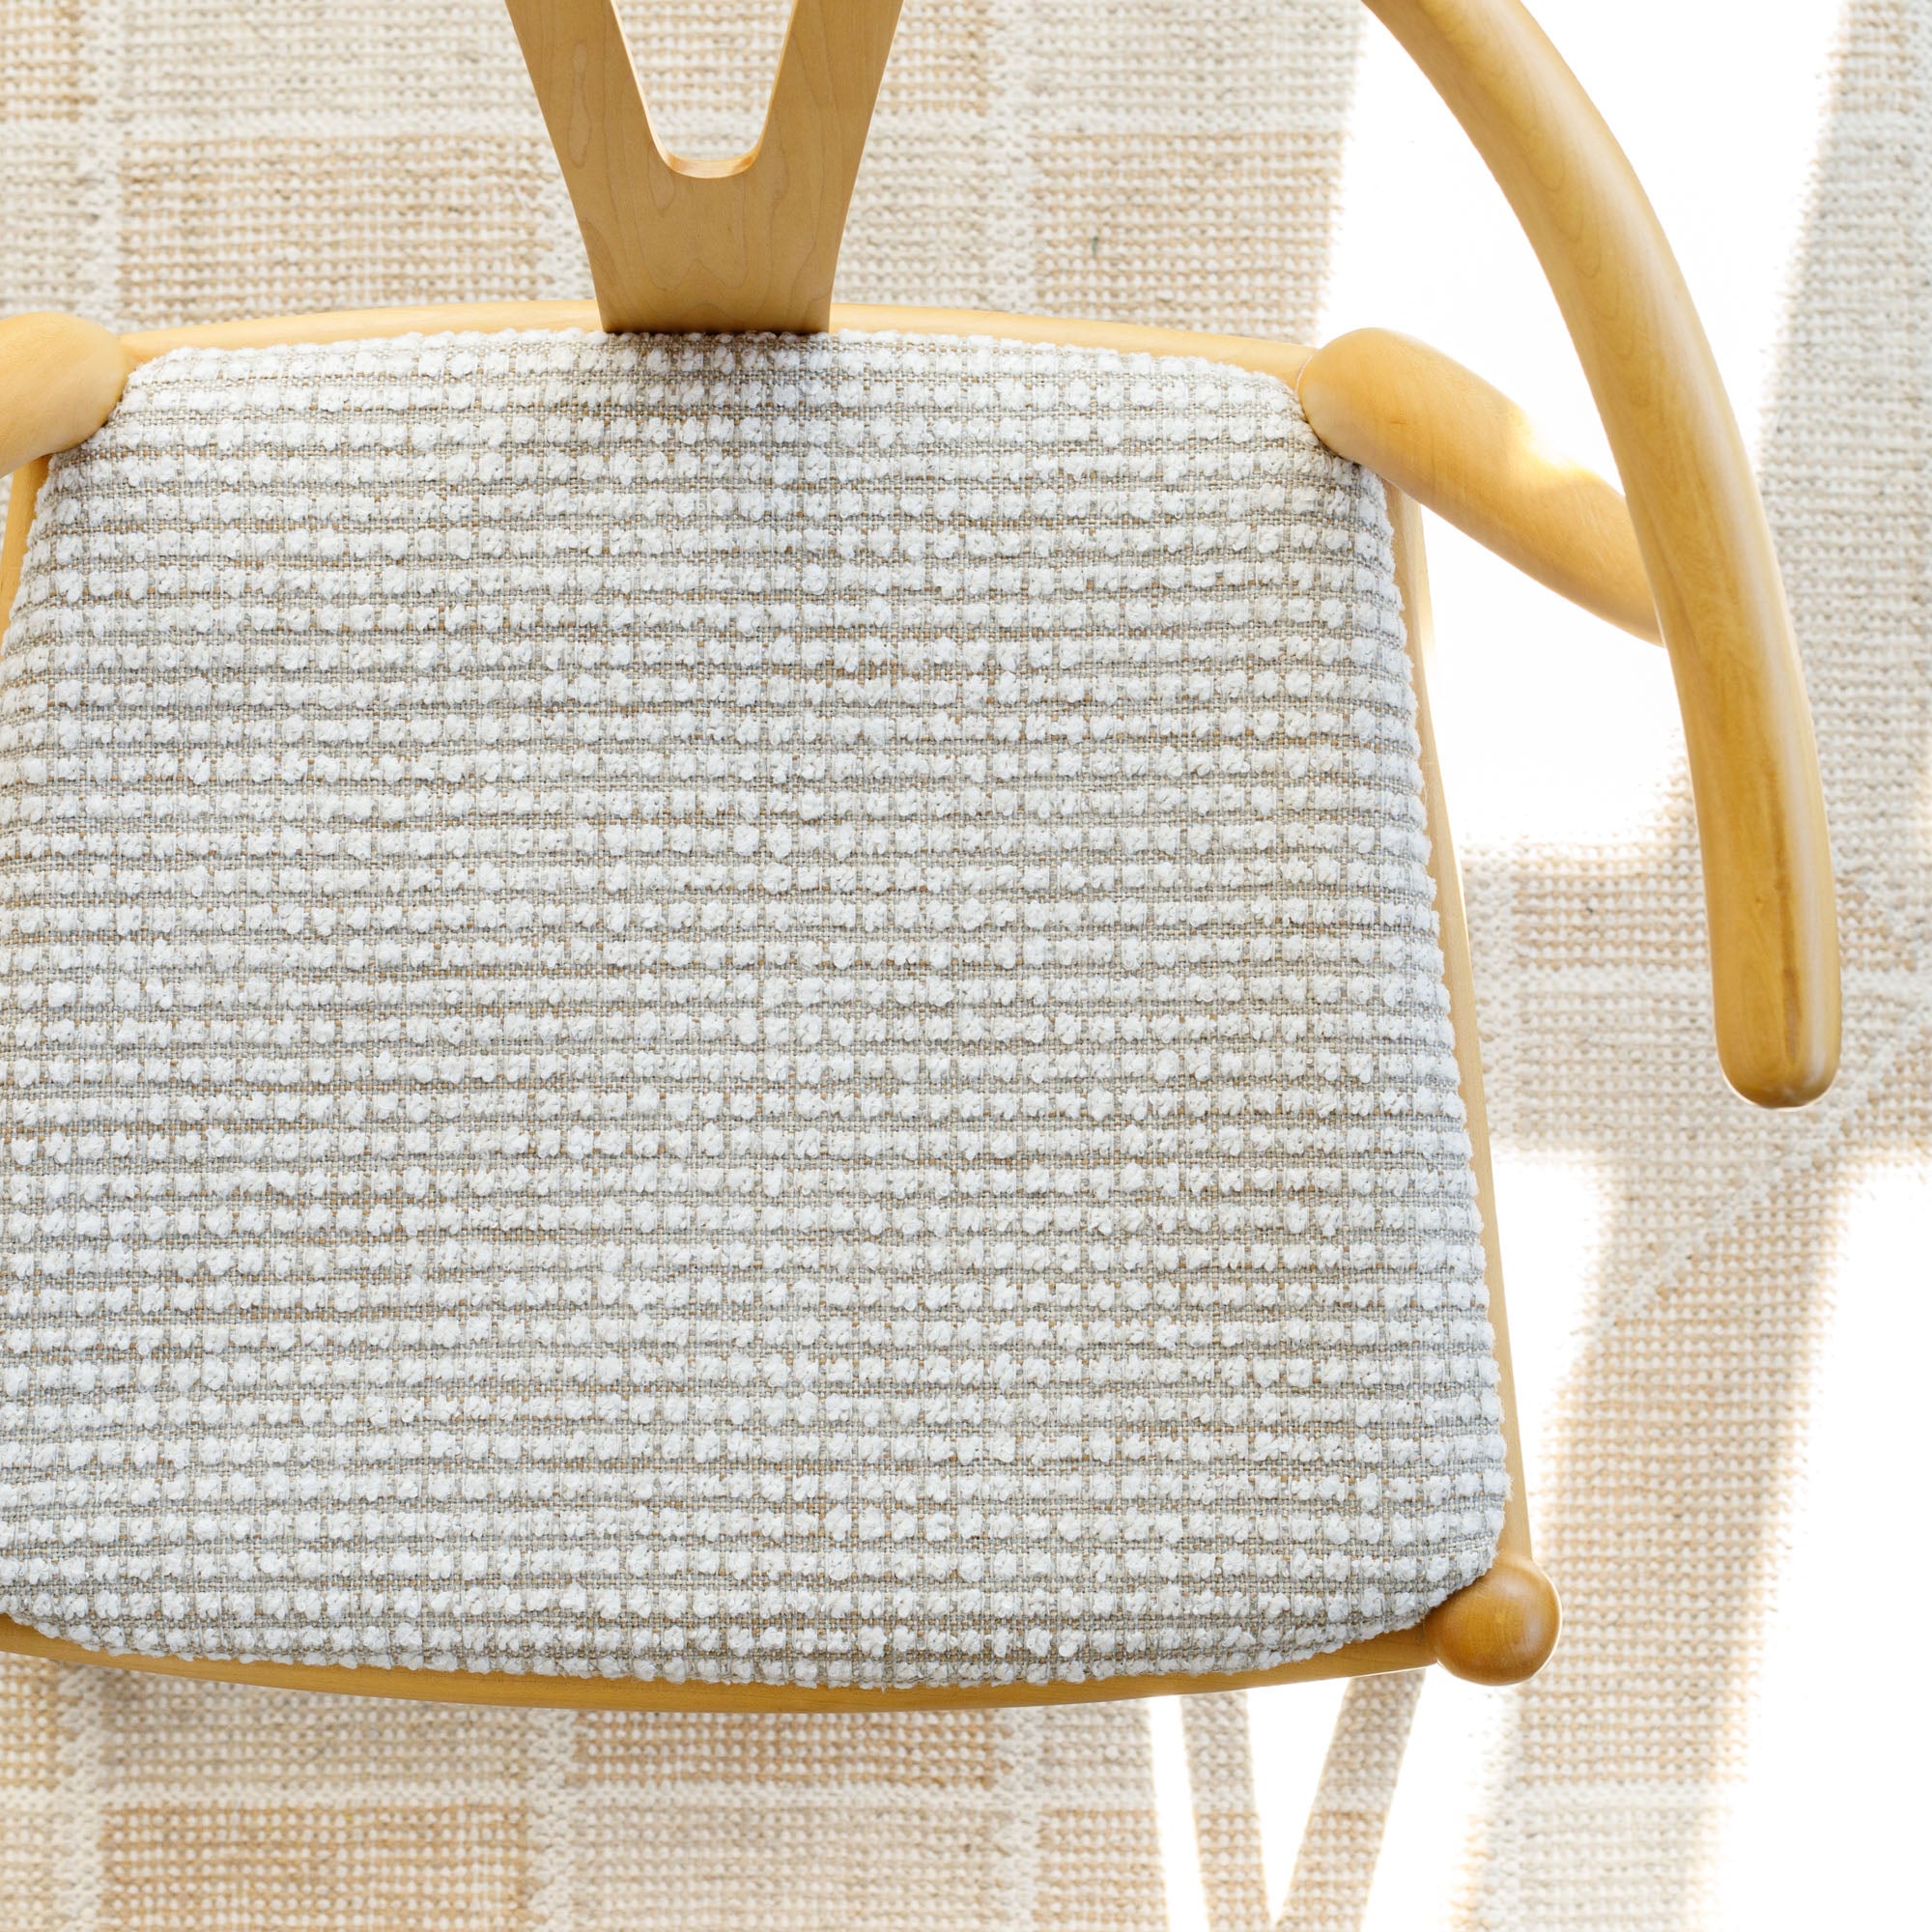 a greige and white nubby textured upholstered chair seat